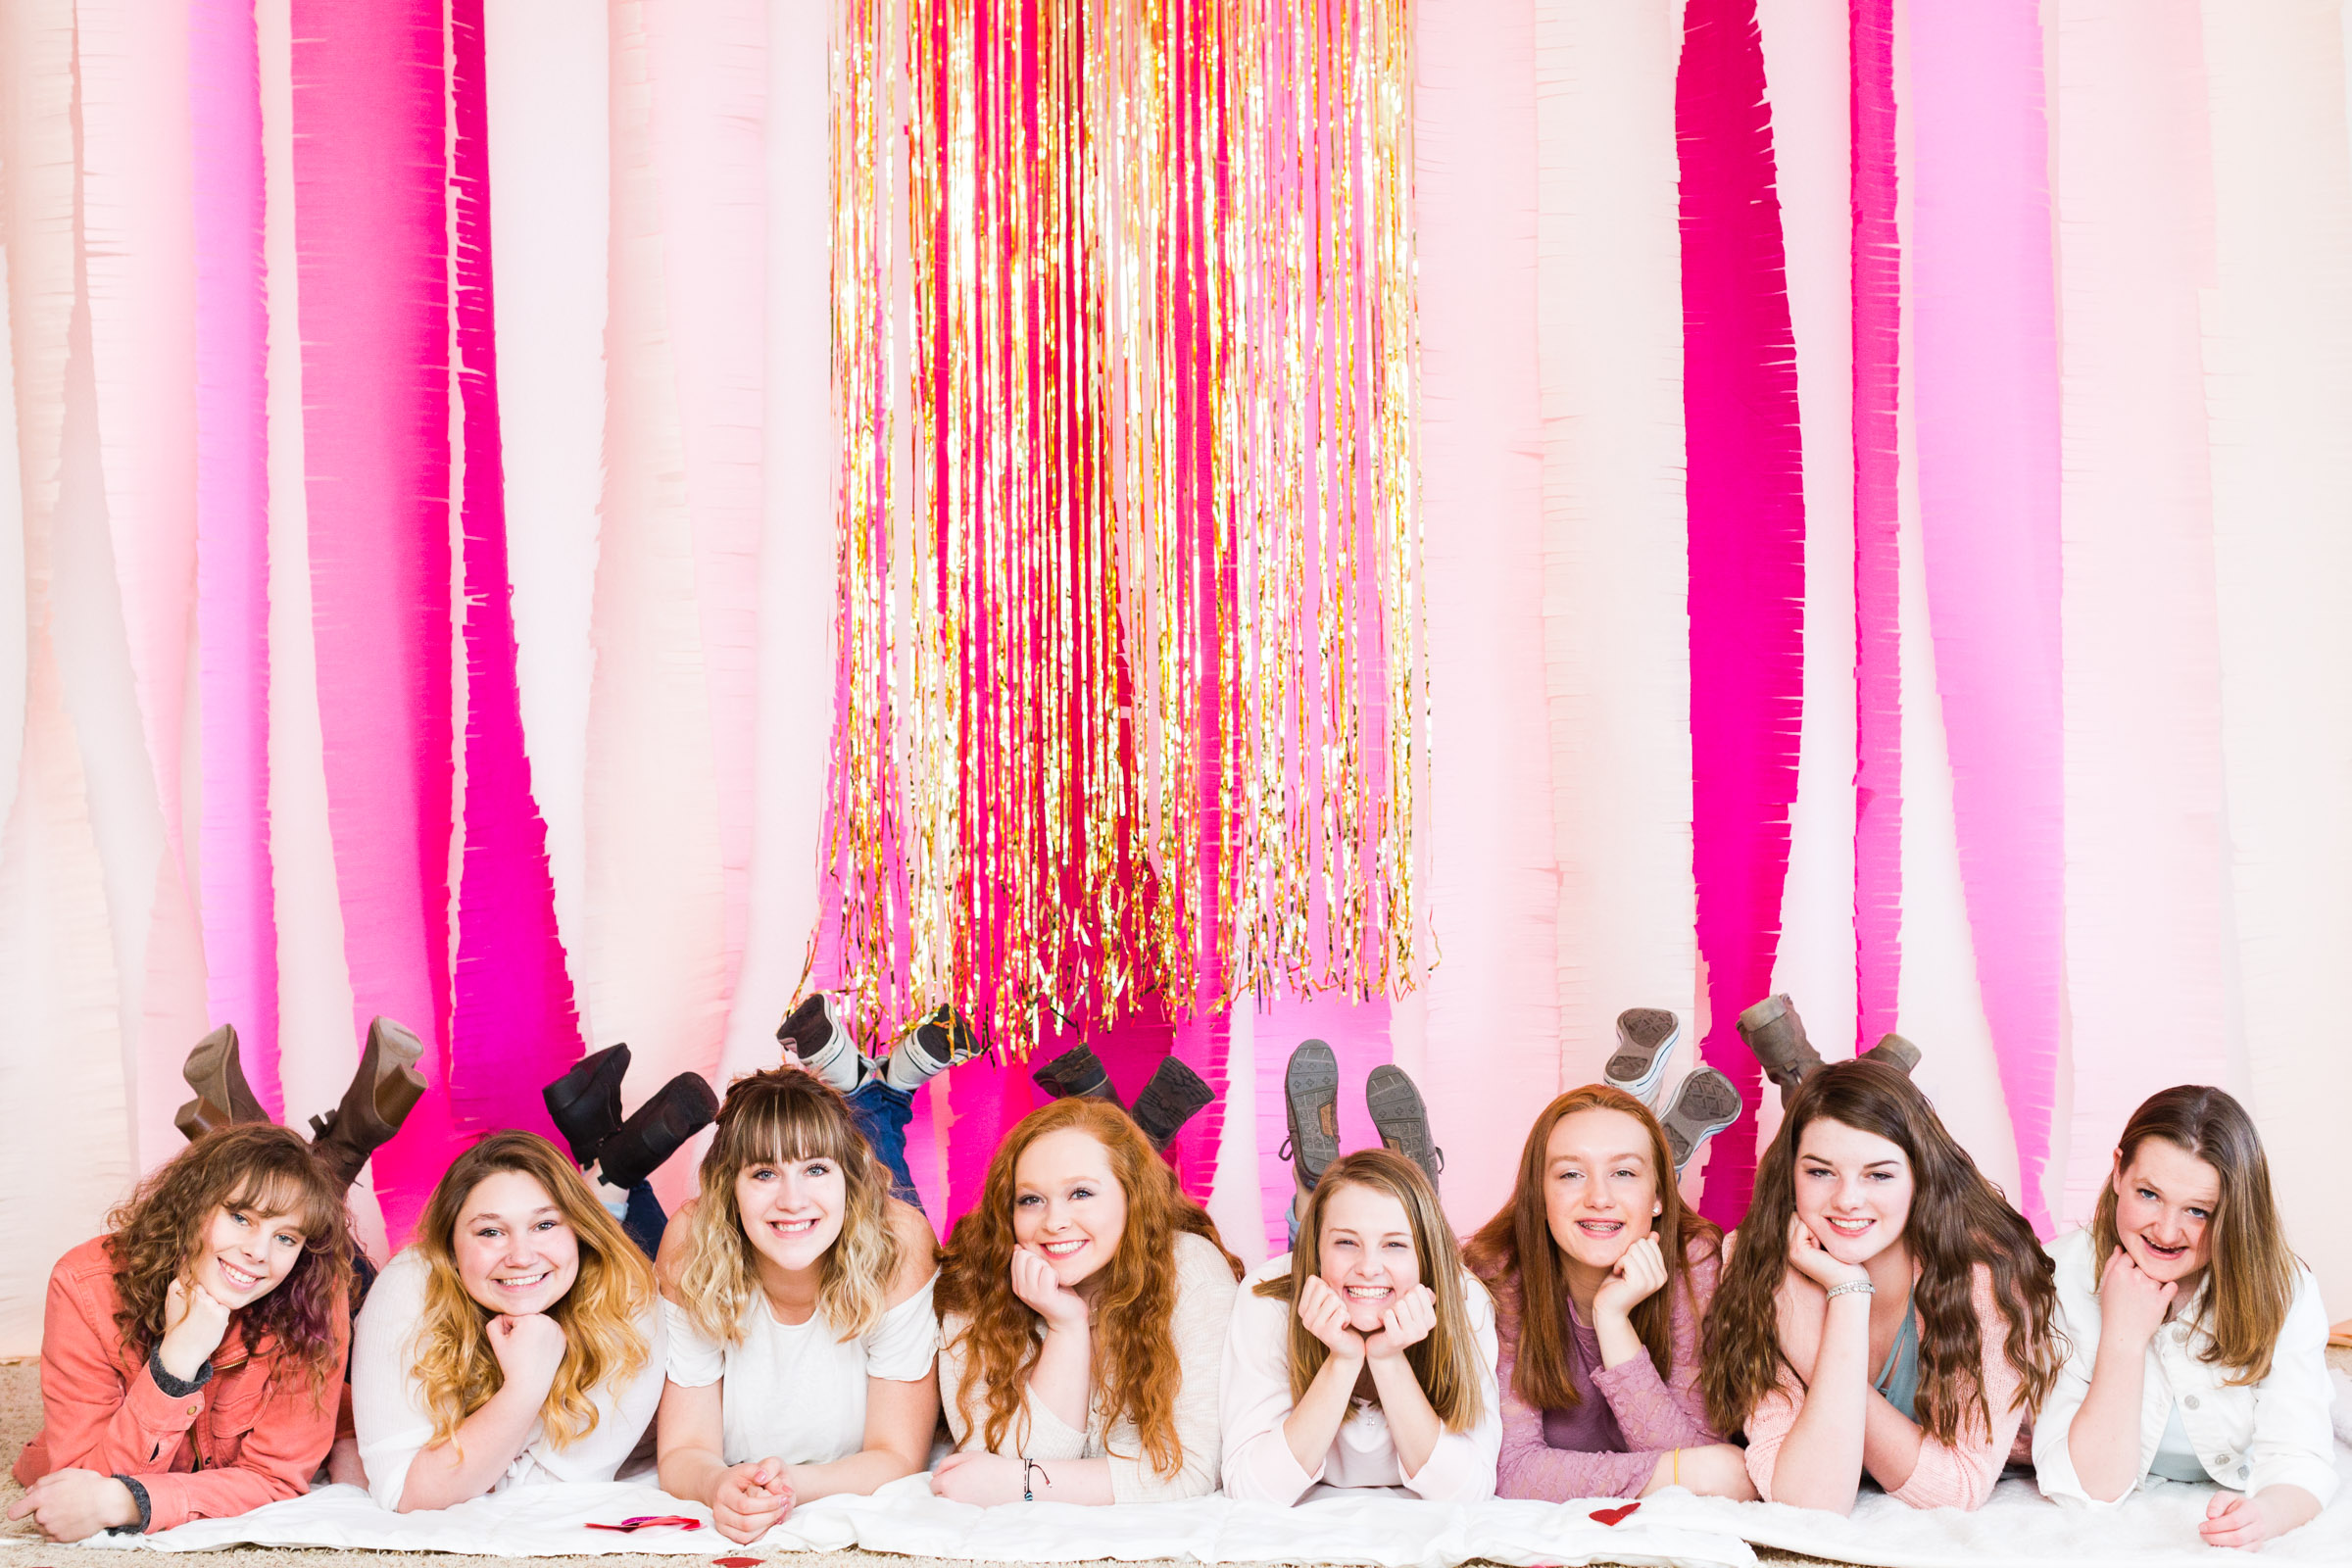 Spokesmodel Team of high school girls smiling and laying on the floor in front of a pink and gold backdrop